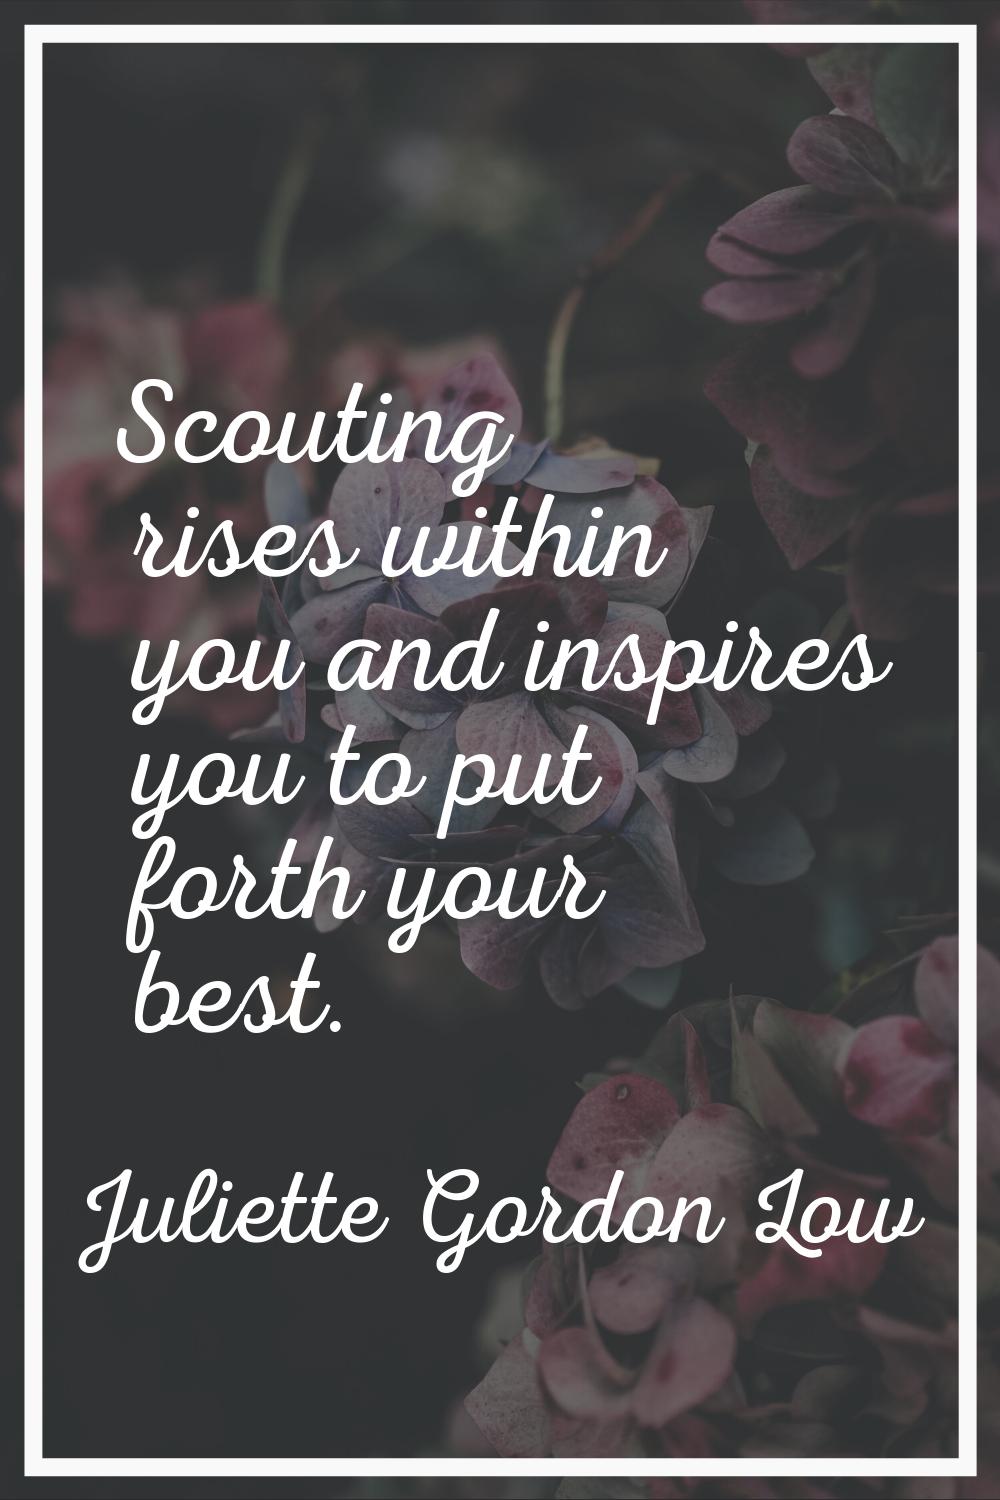 Scouting rises within you and inspires you to put forth your best.